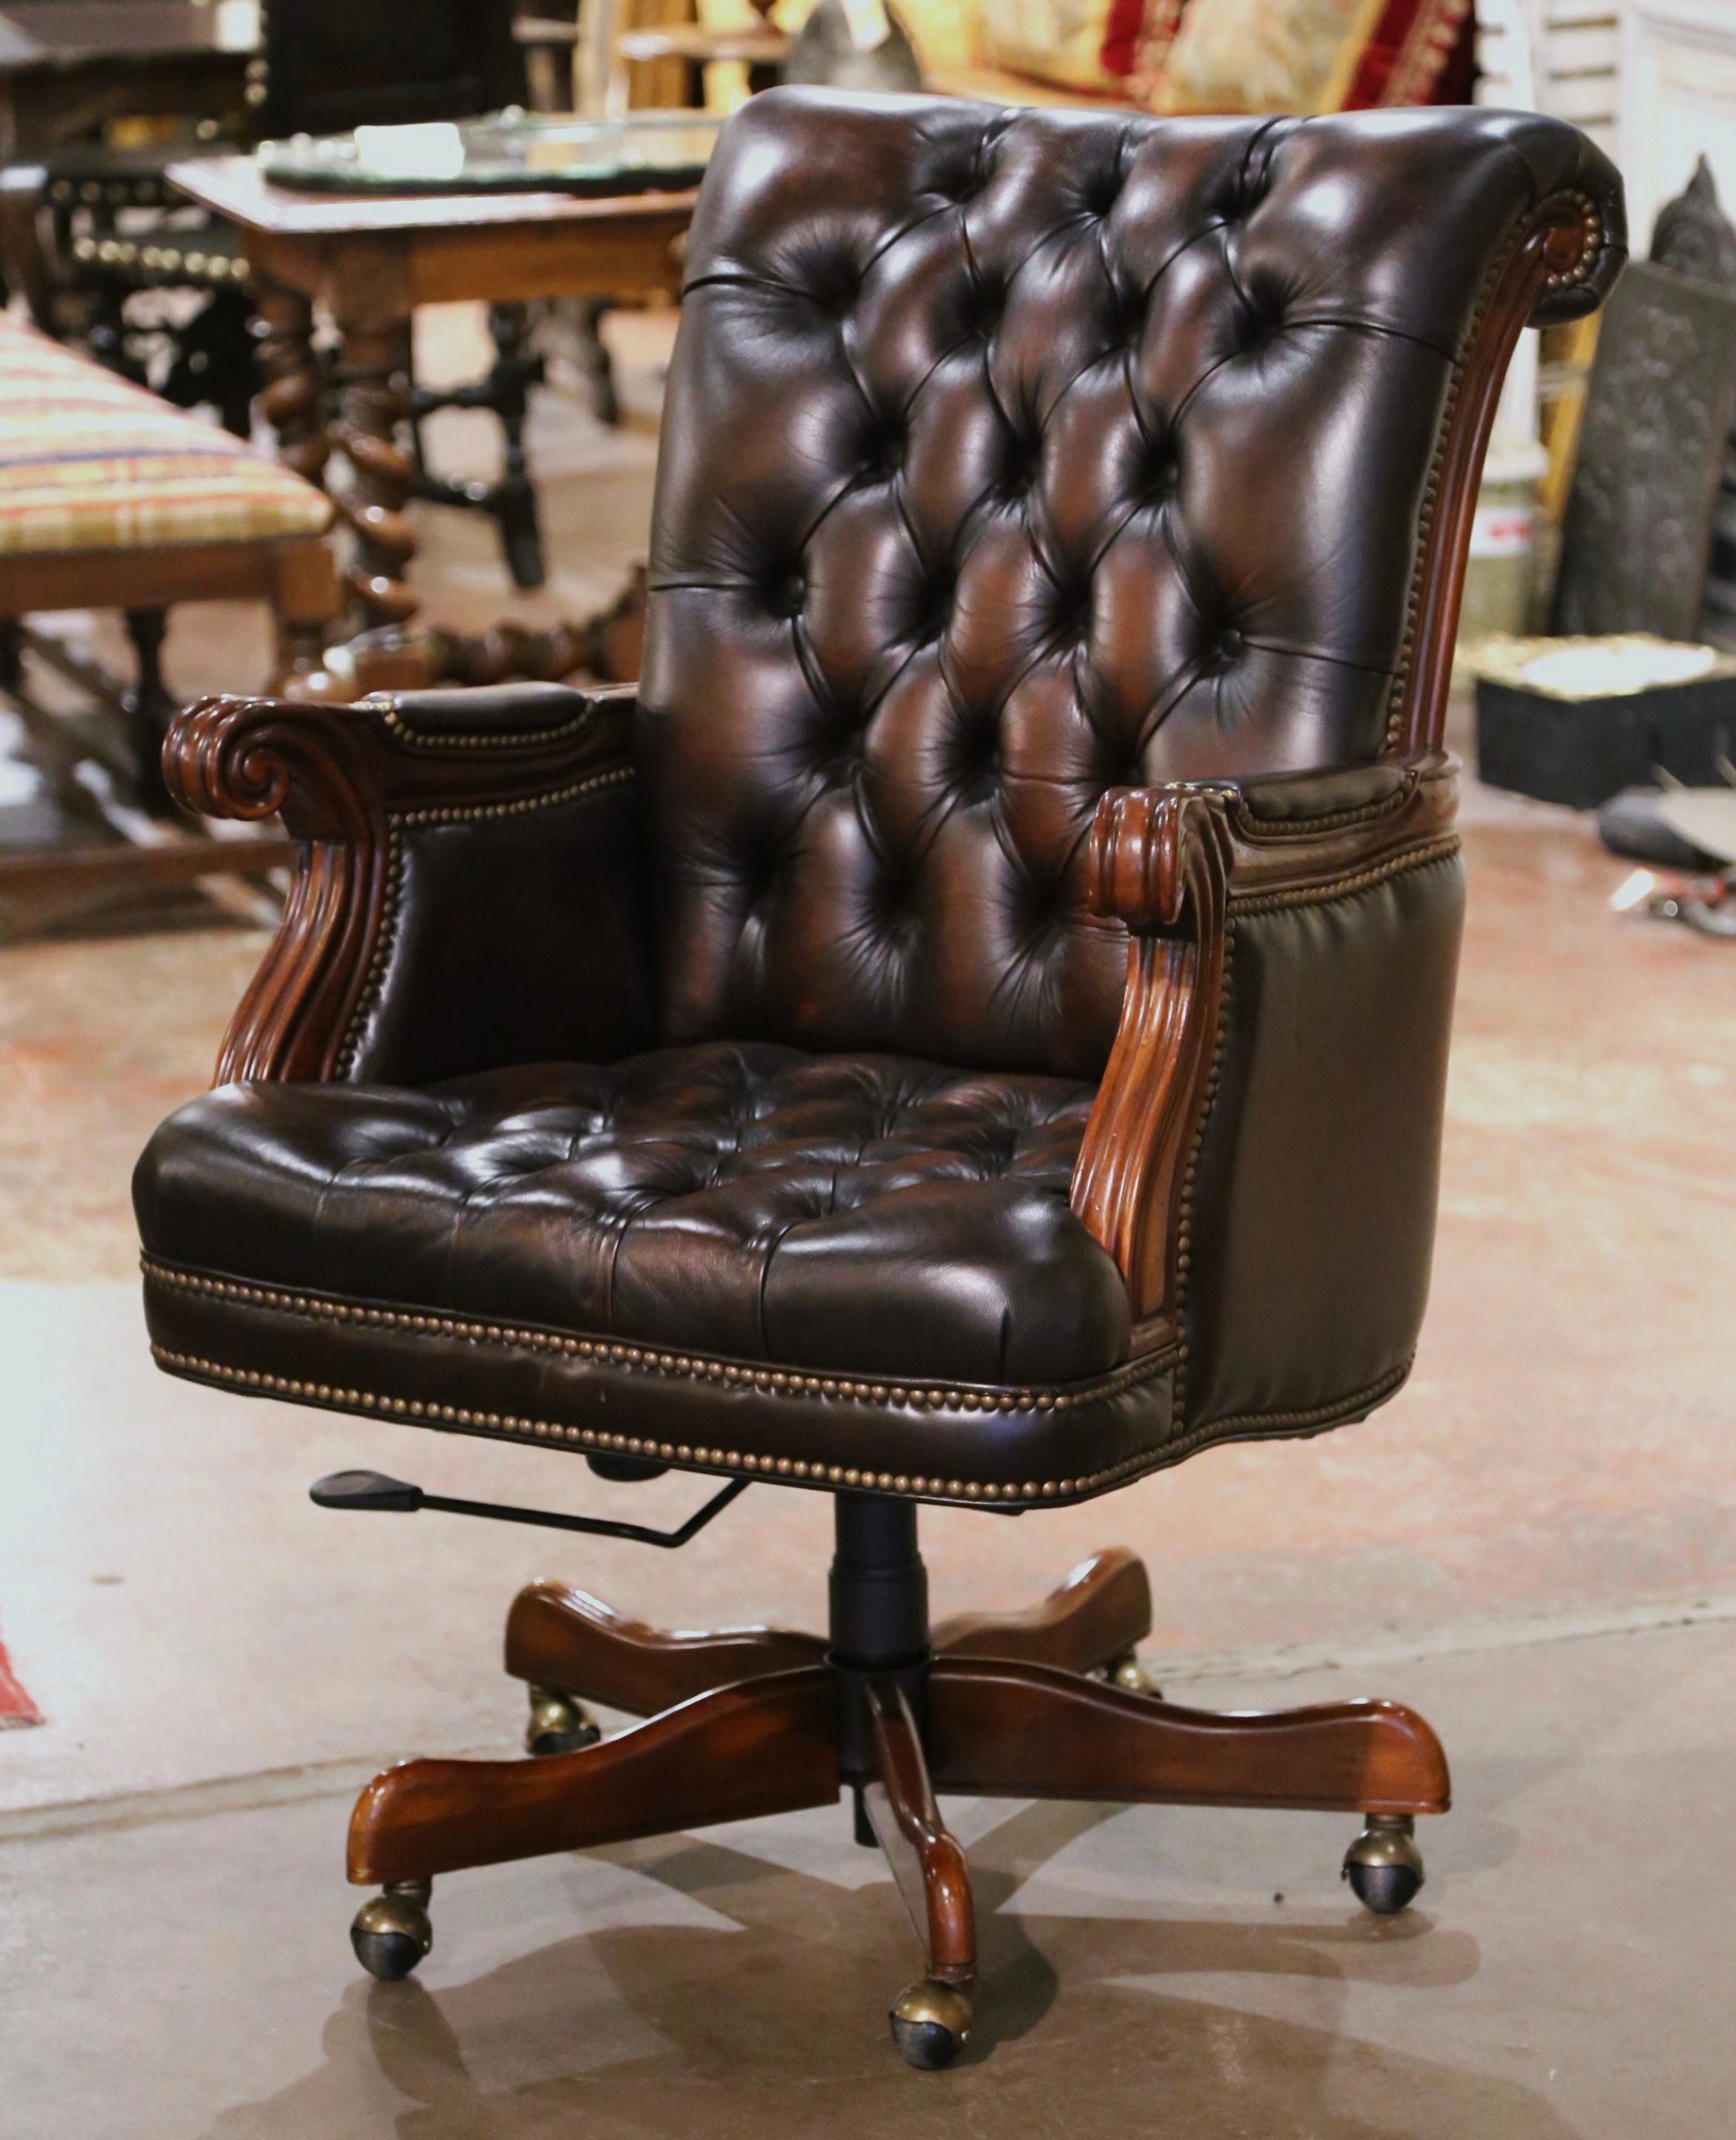 Hand-Crafted Vintage Adjustable and Swivel Executive Office Desk Armchair with Tufted Leather